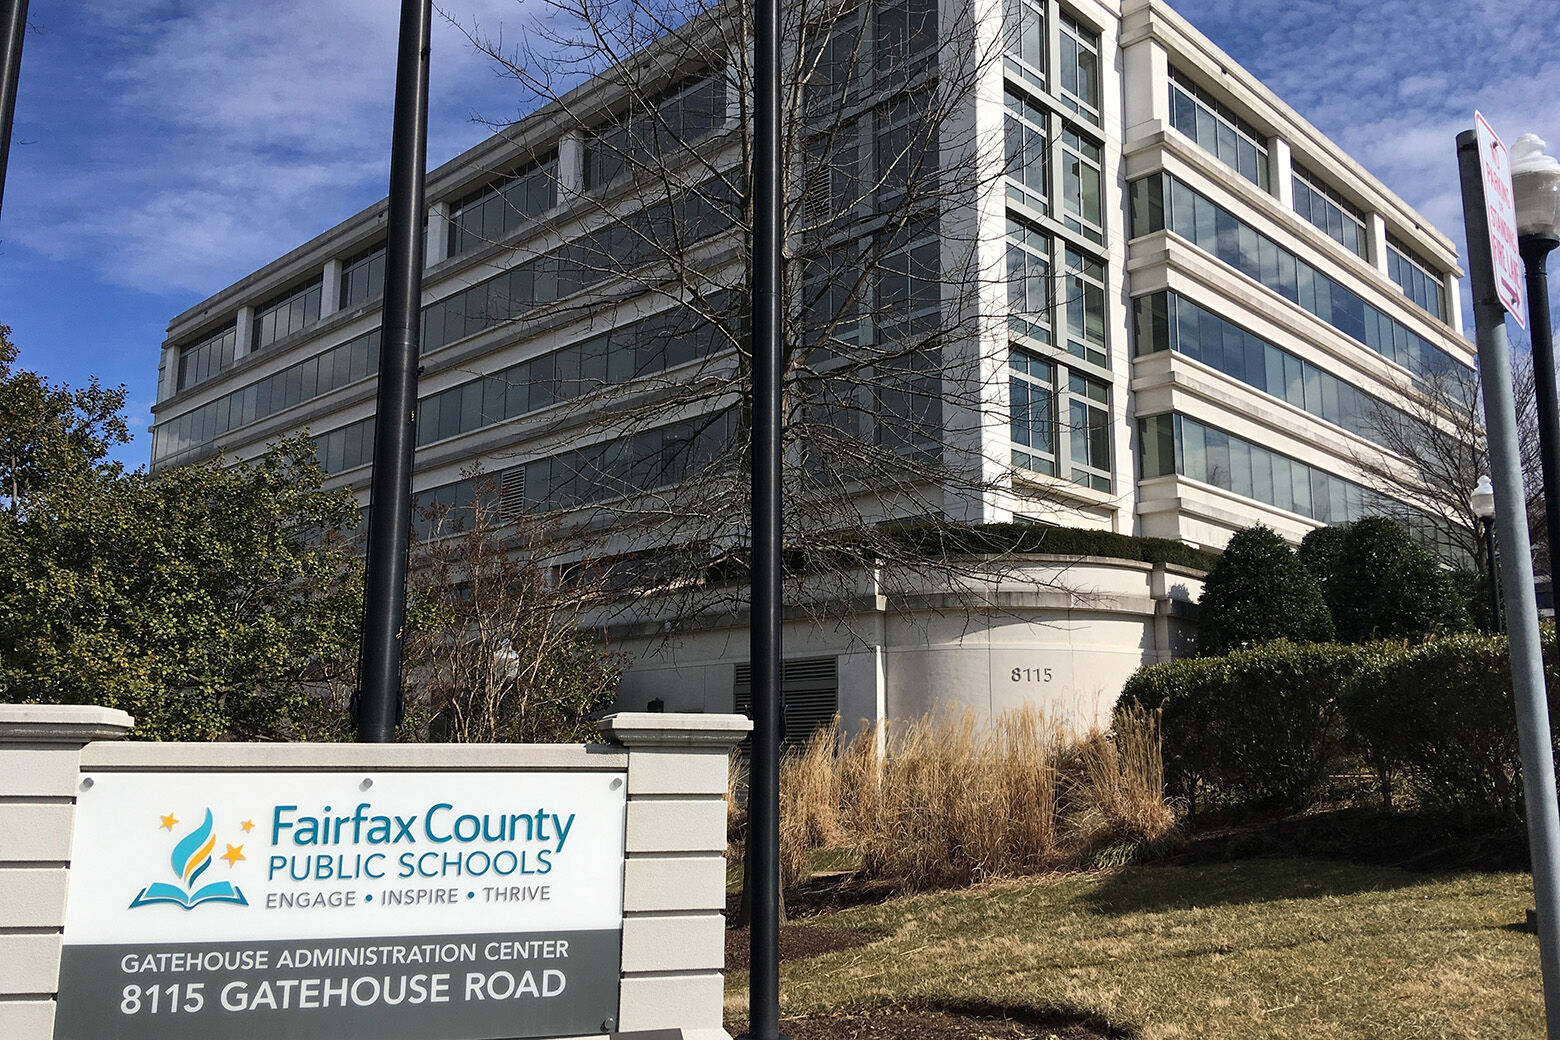 Who Else Wants To Know The Mystery Behind fairfax county board of education?